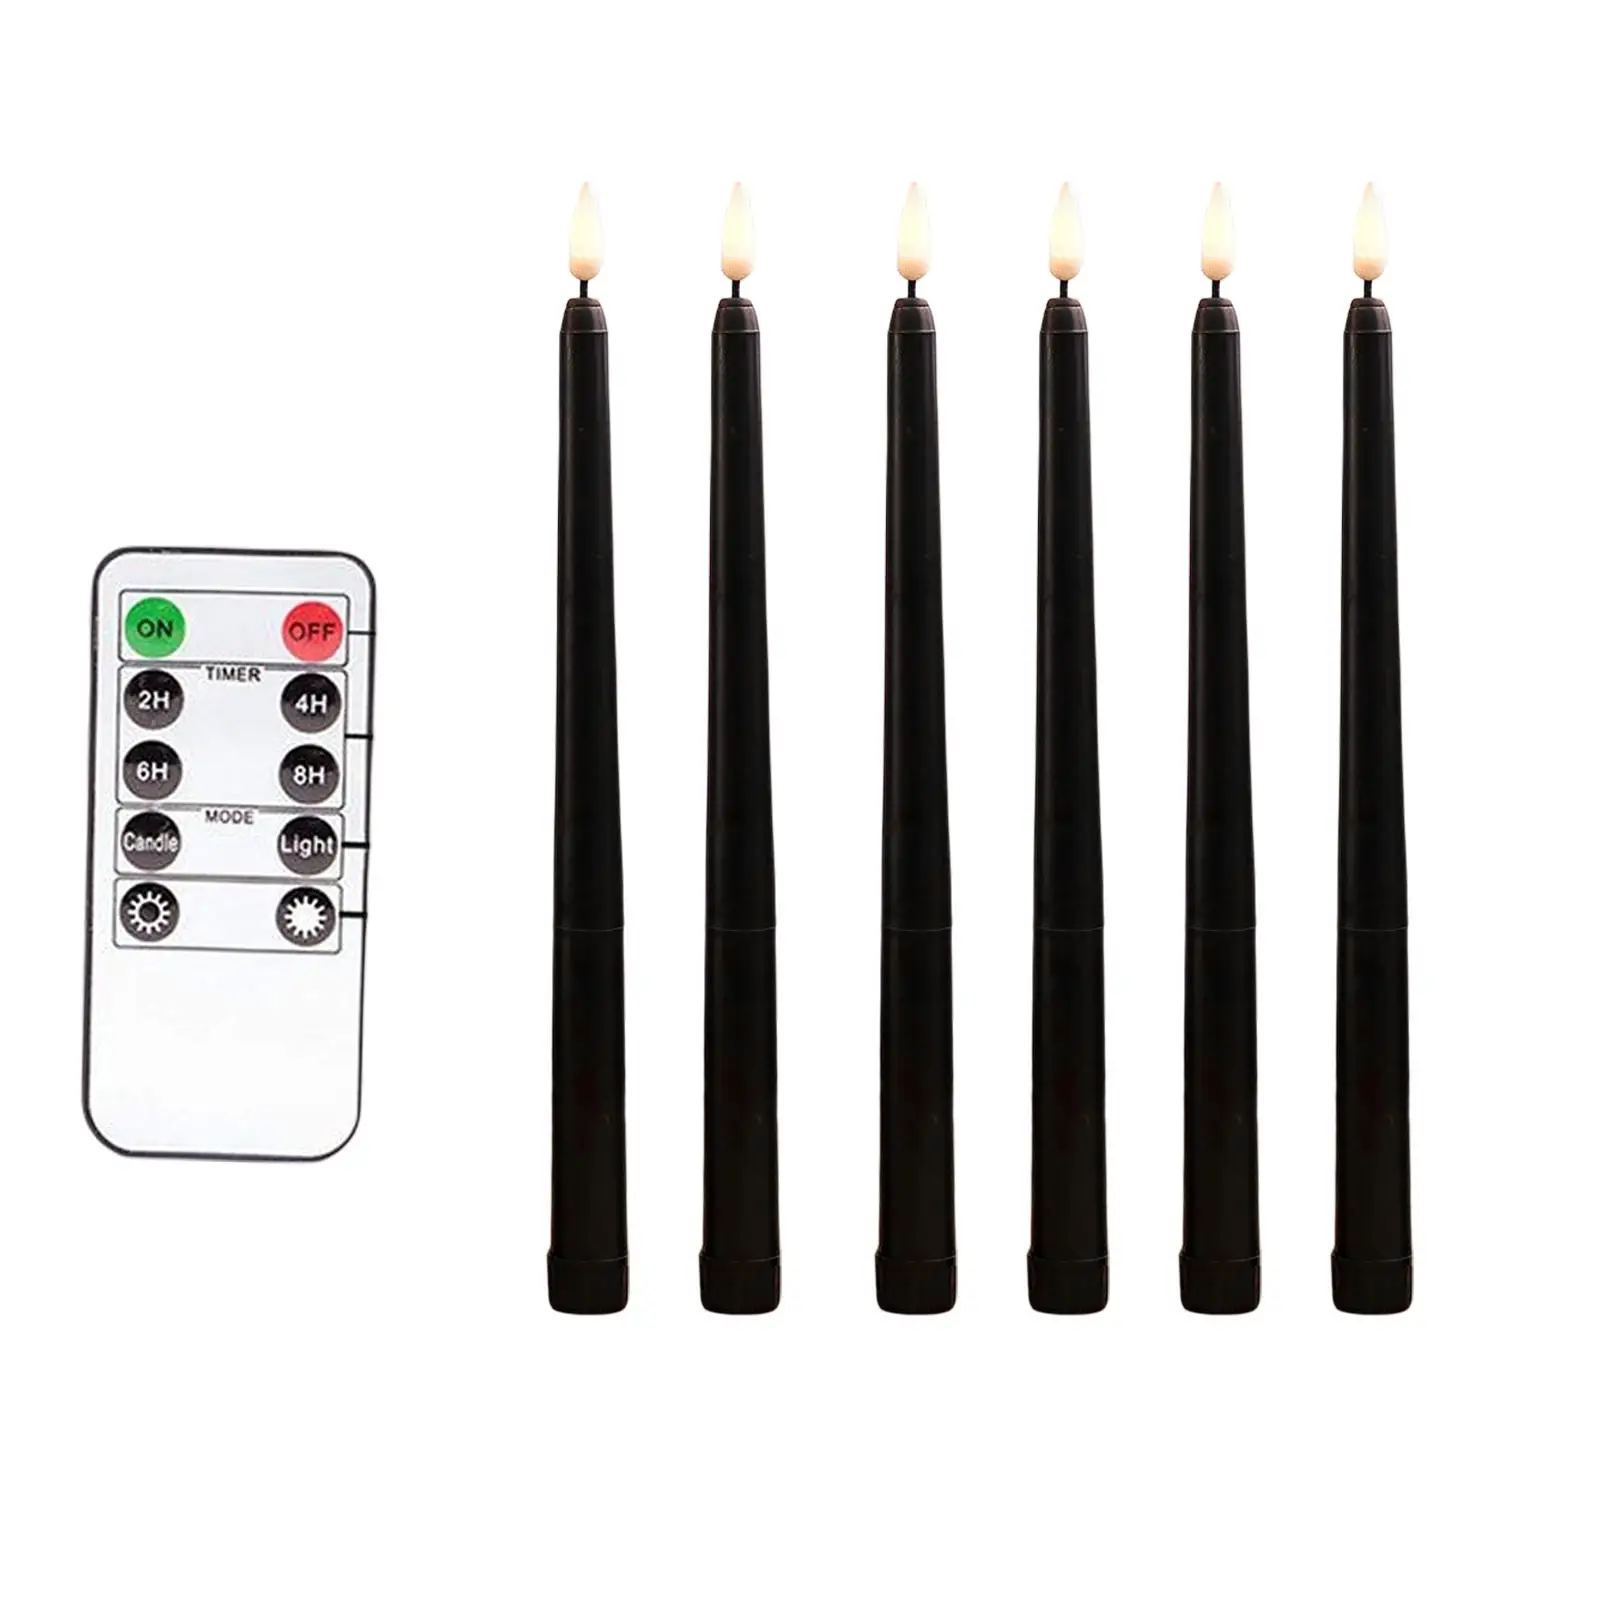 6Pcs Realistic LED Tapered Candles Flameless Taper Candle Timer Window Candles for Wedding Christmas Decoration Festival Holiday